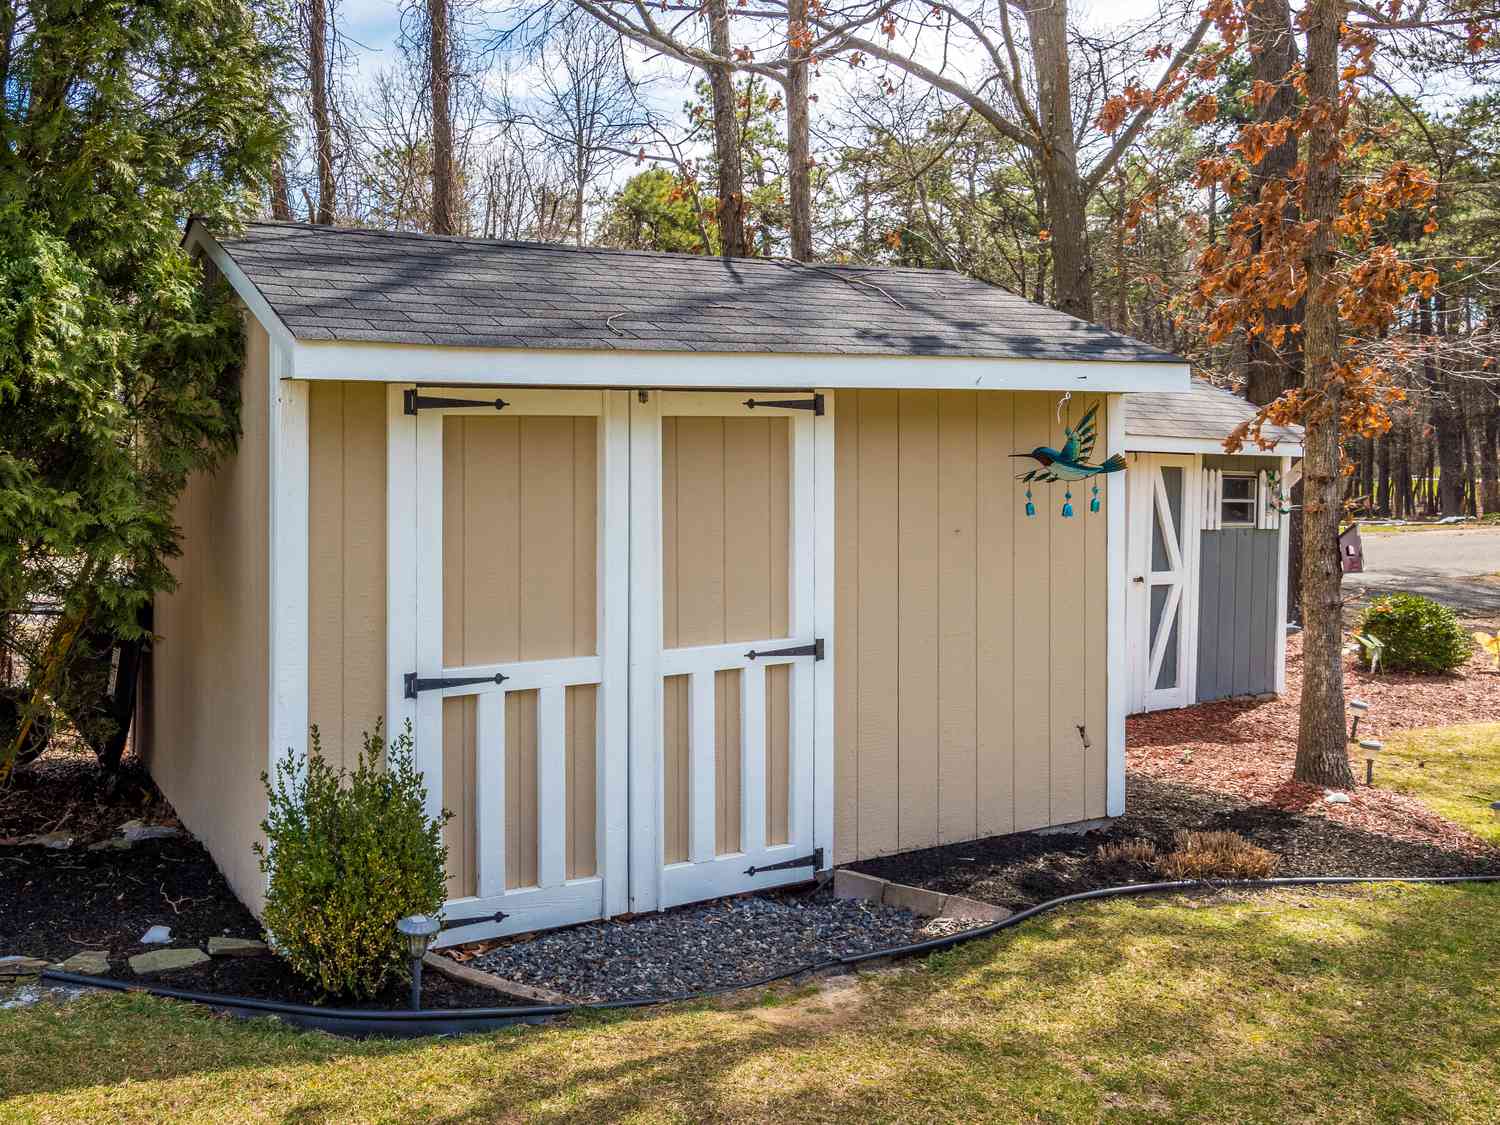 DIY: Building Double Shed Doors For Extra Storage Space